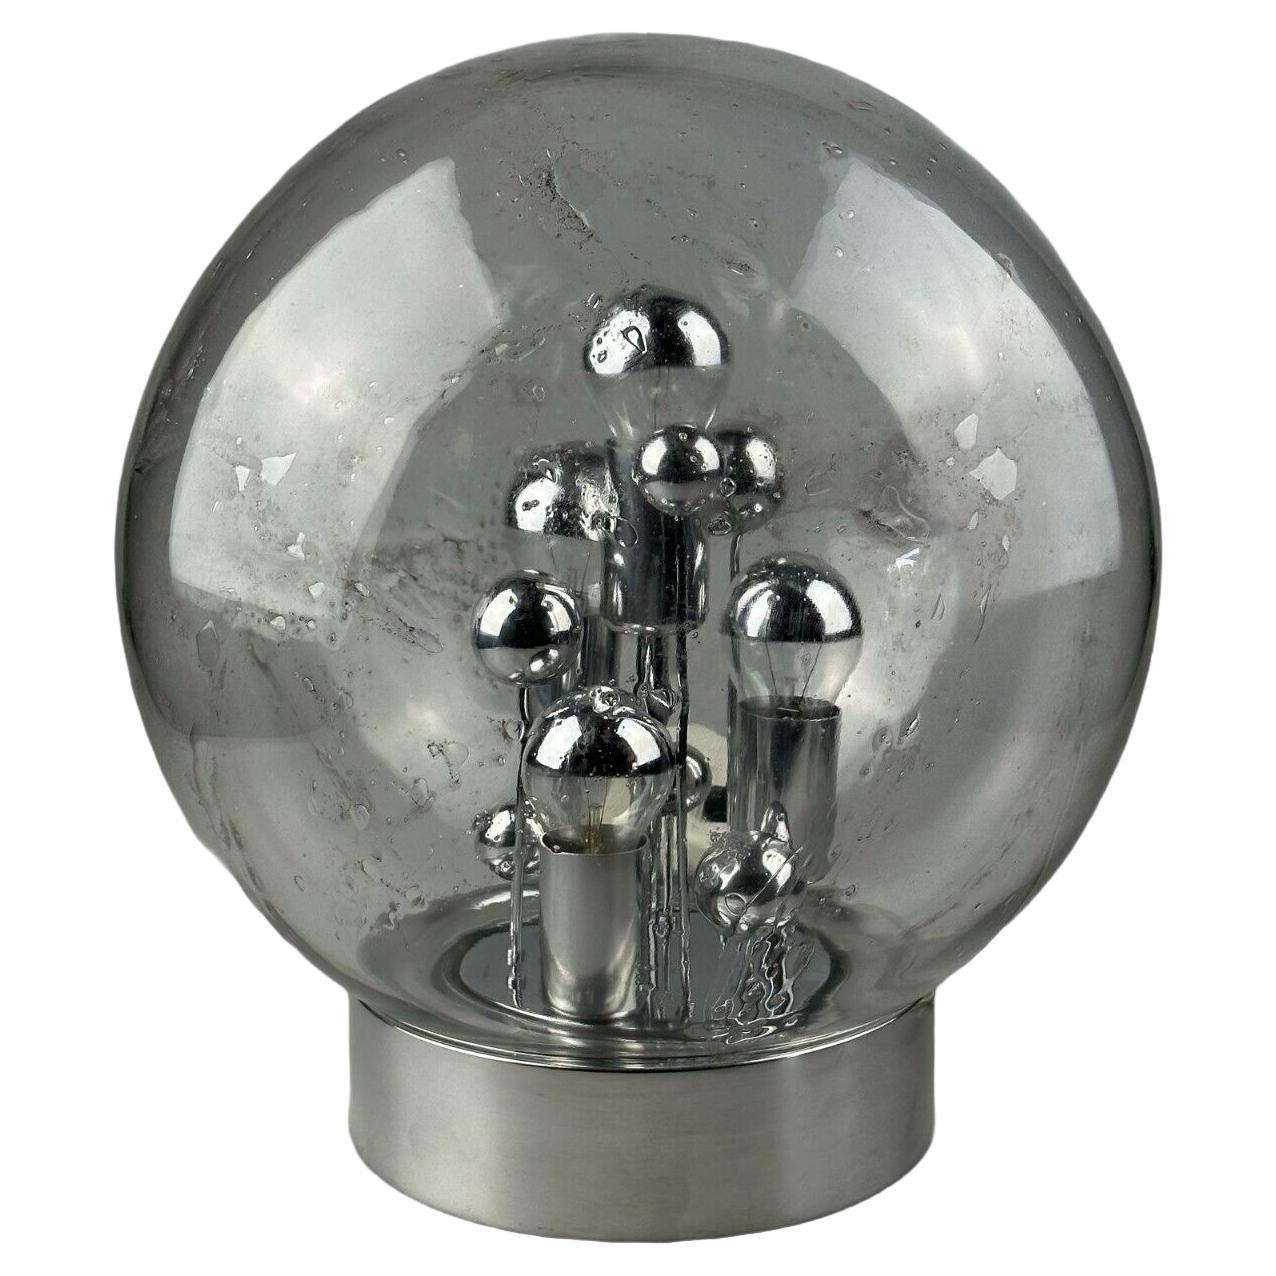 60s 70s table lamp ball lamp Doria "Big Ball" glass space age design For Sale